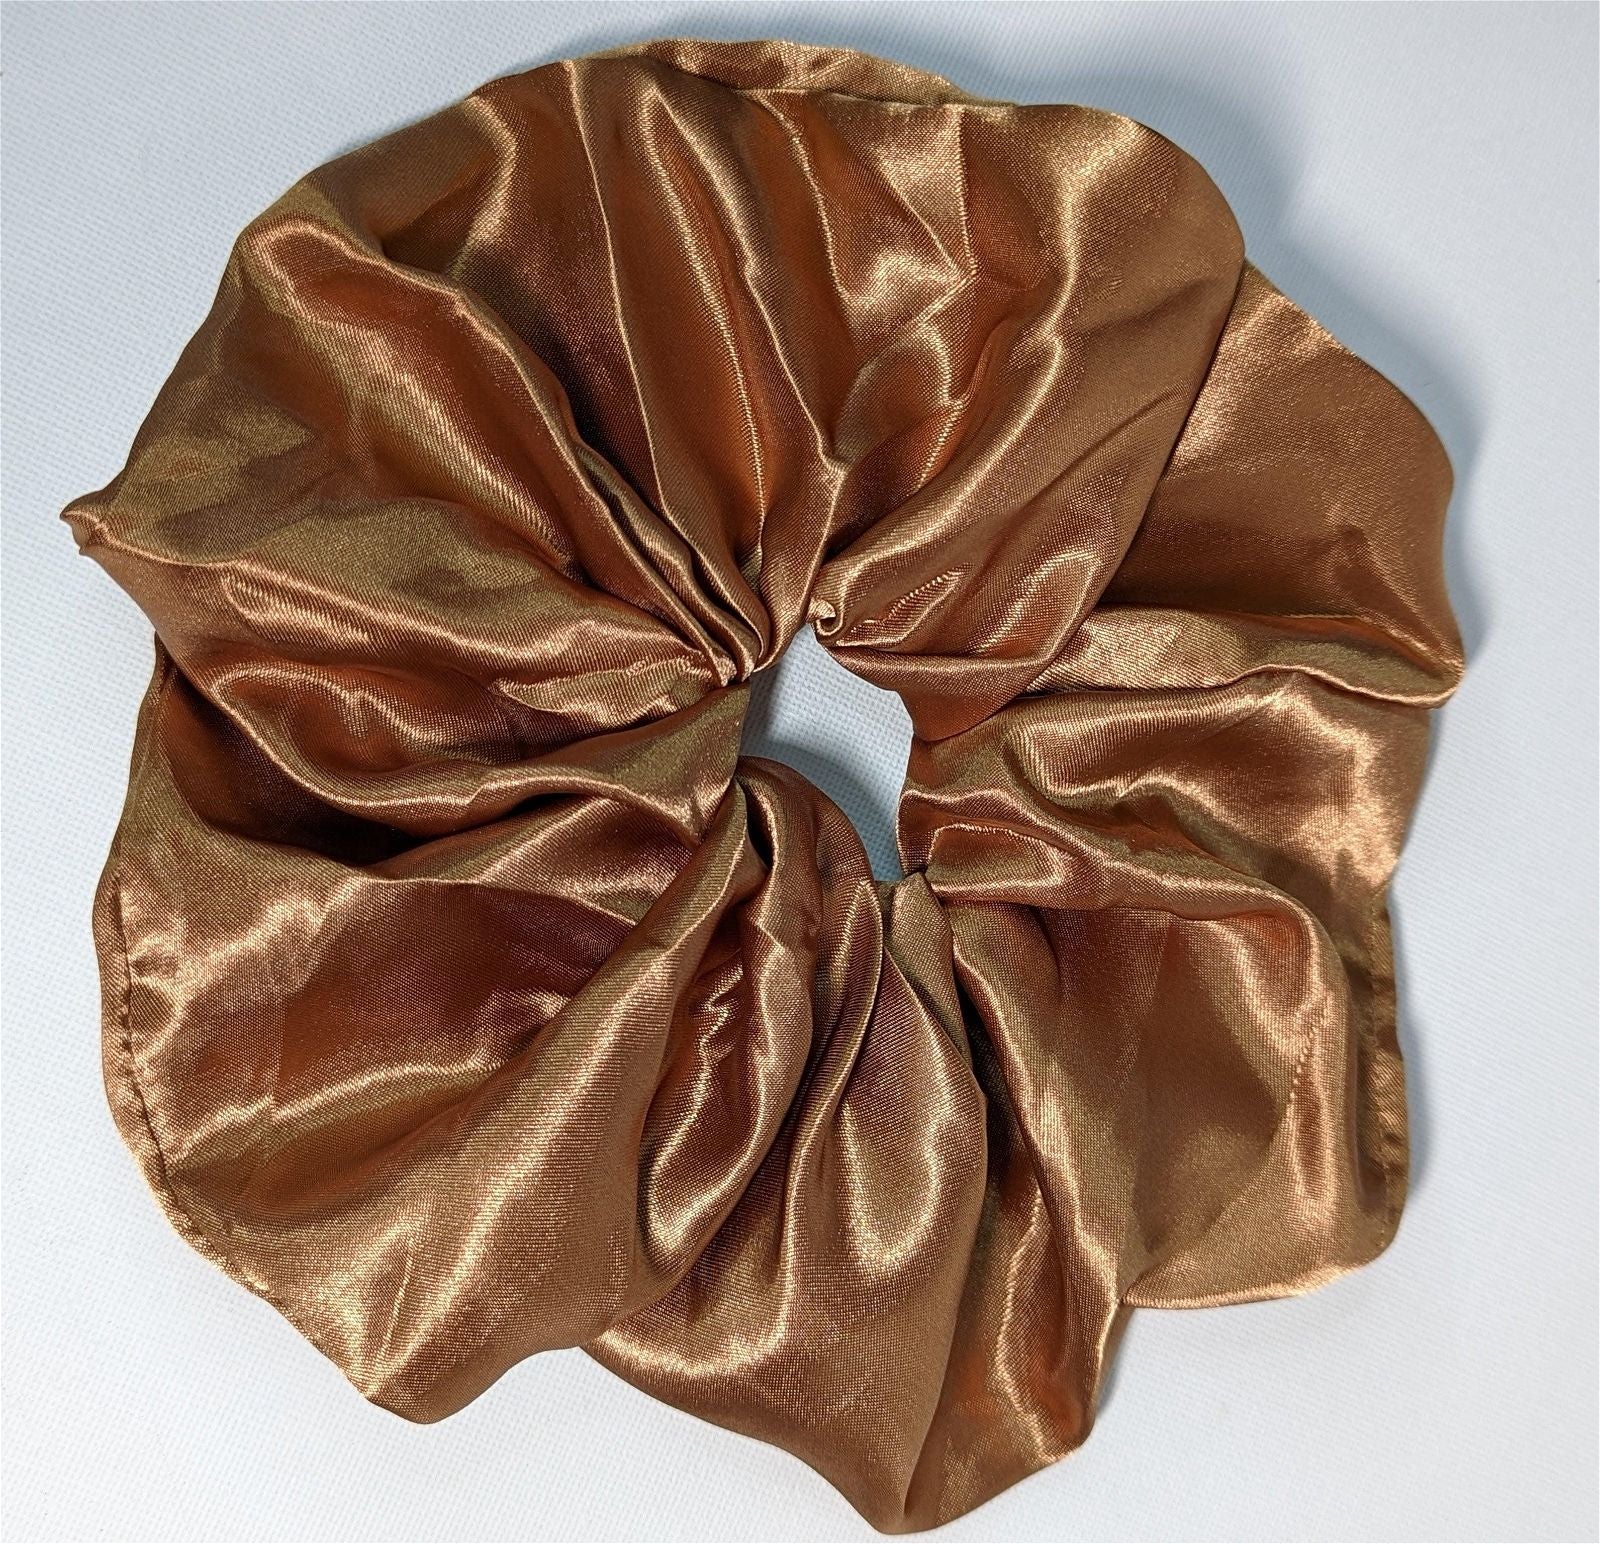 The Jumbo Scrunchie - Maily's Classic Accessories